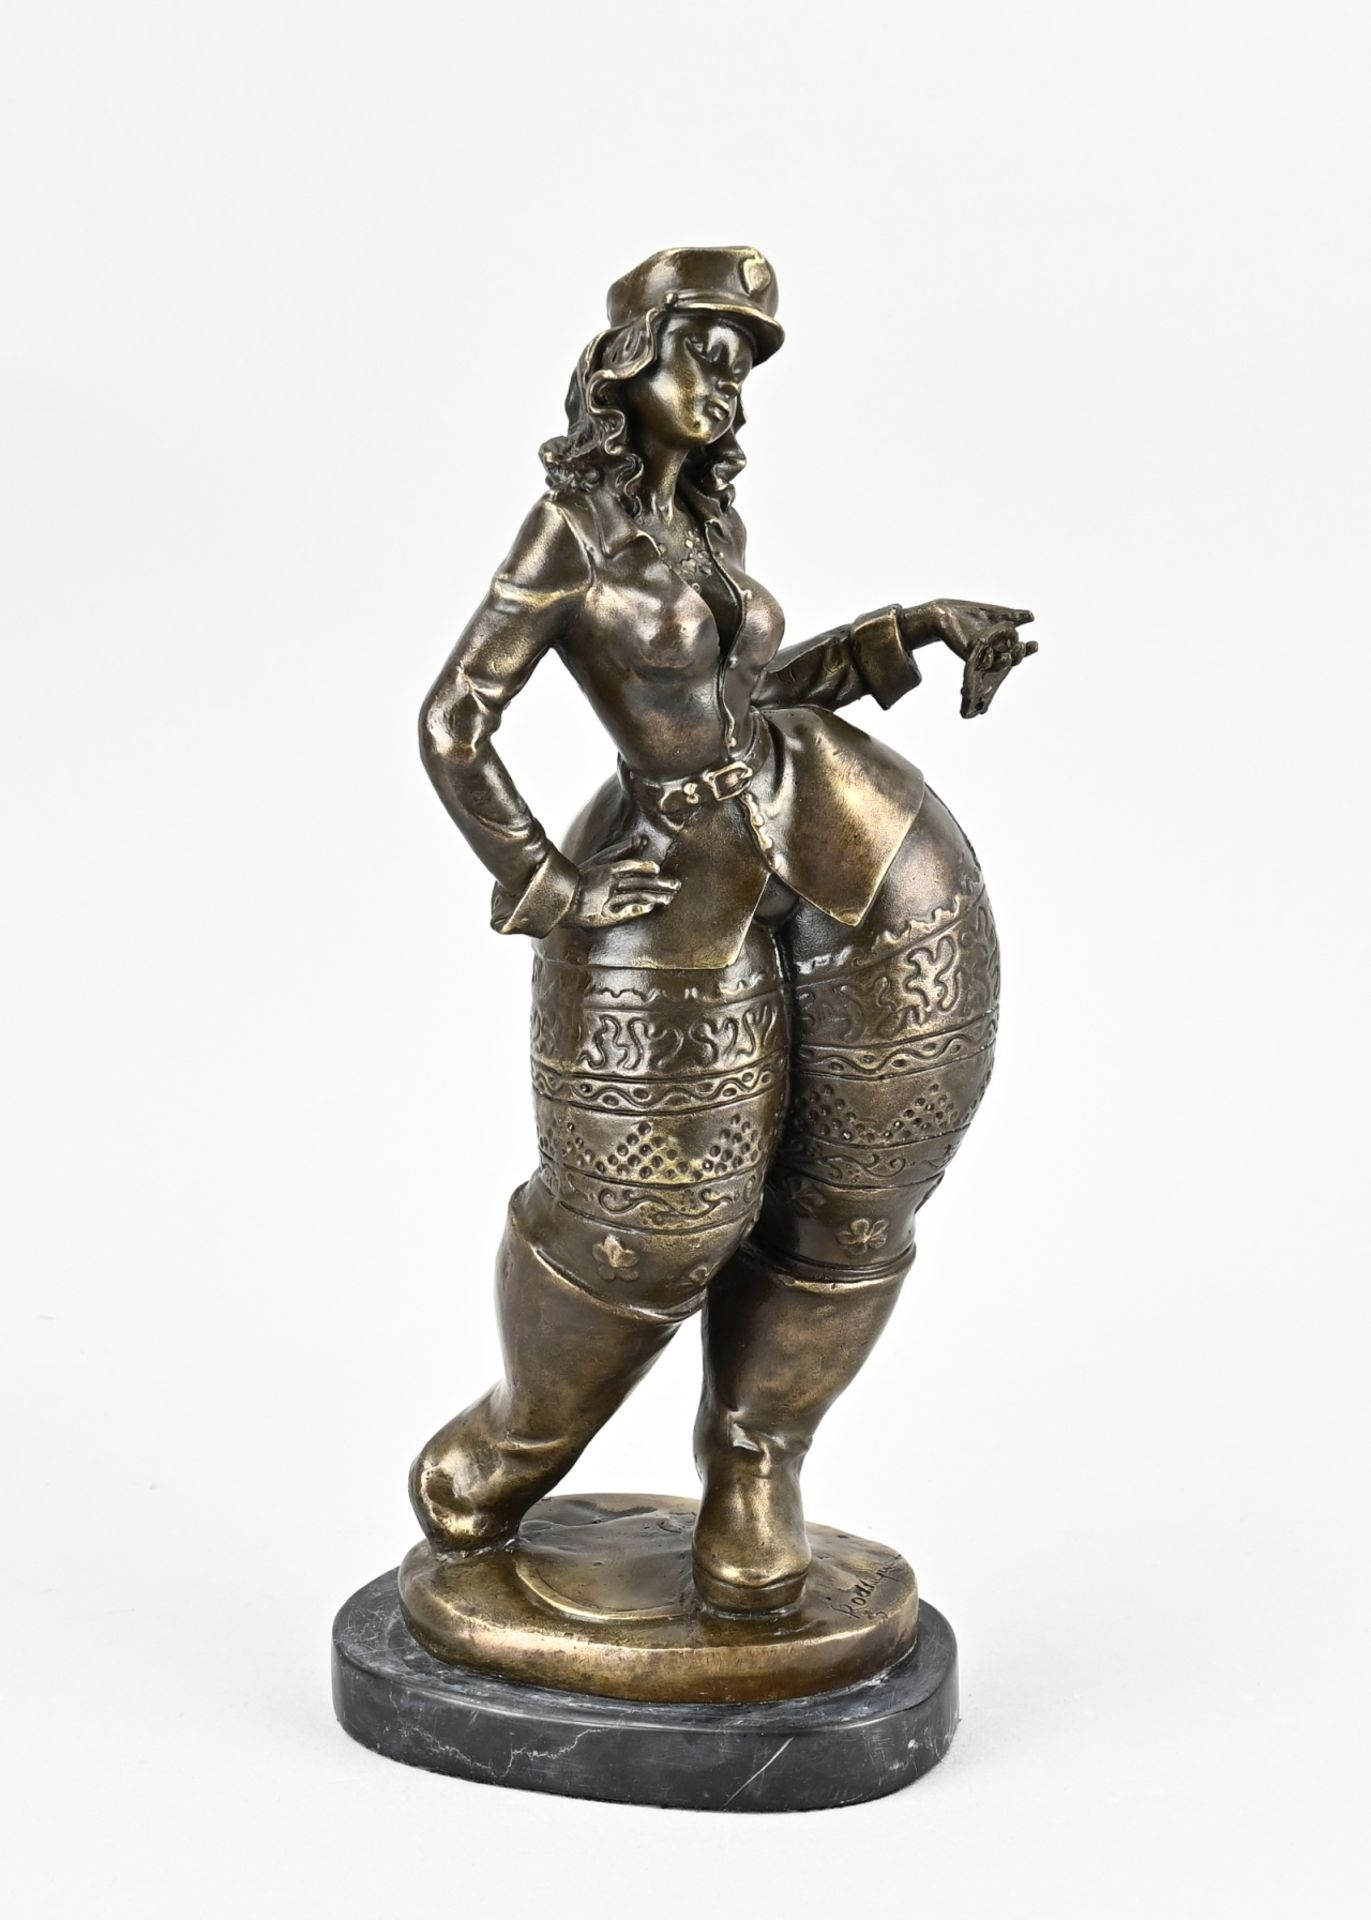 Bronze statue, Woman with cap